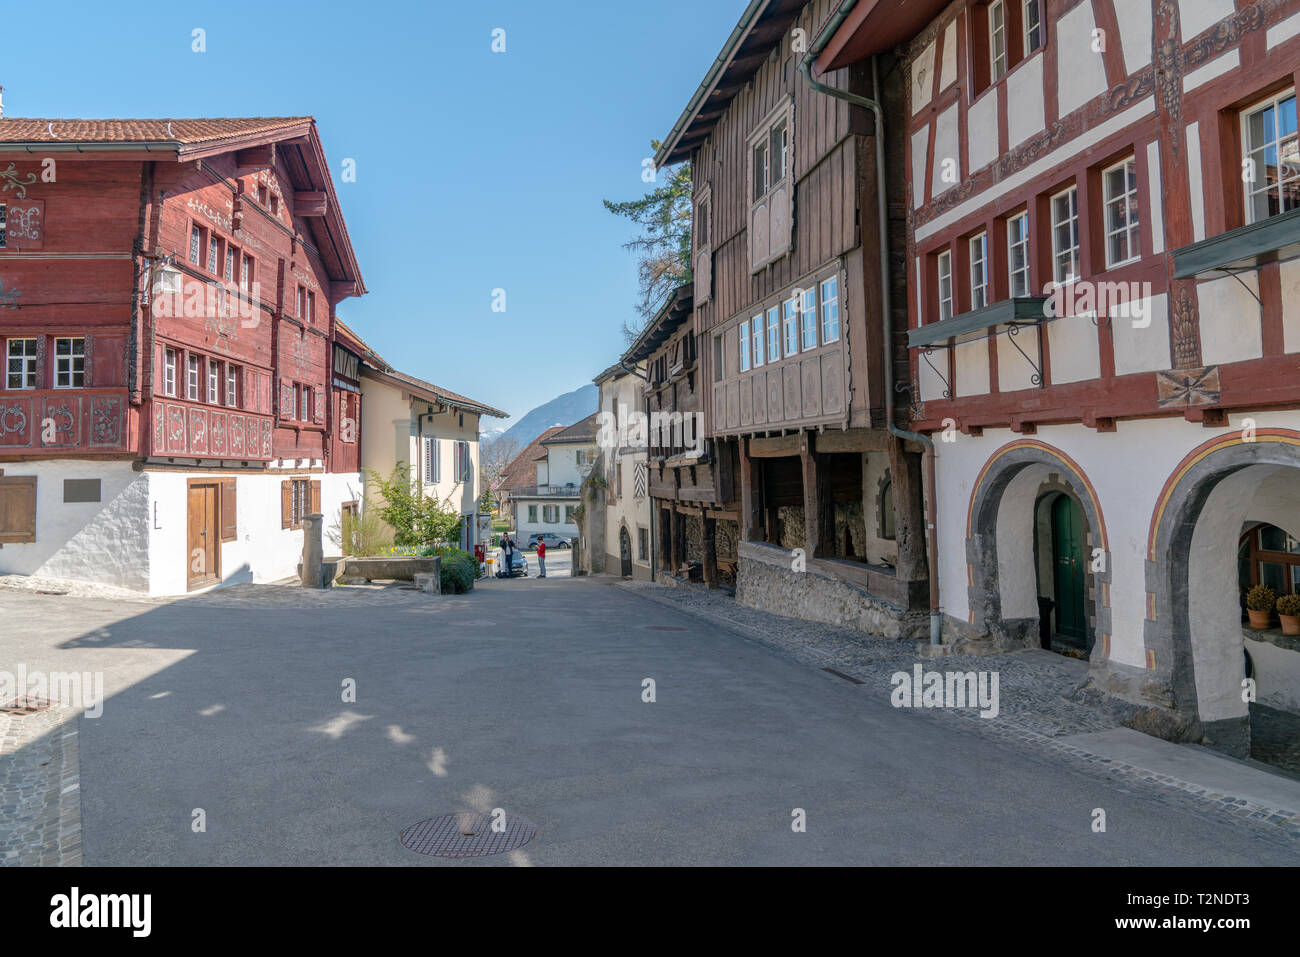 Werdenberg, SG / Switzerland - March 31, 2019: Werdenberg village with historic and traditional buildings and architecture details Stock Photo